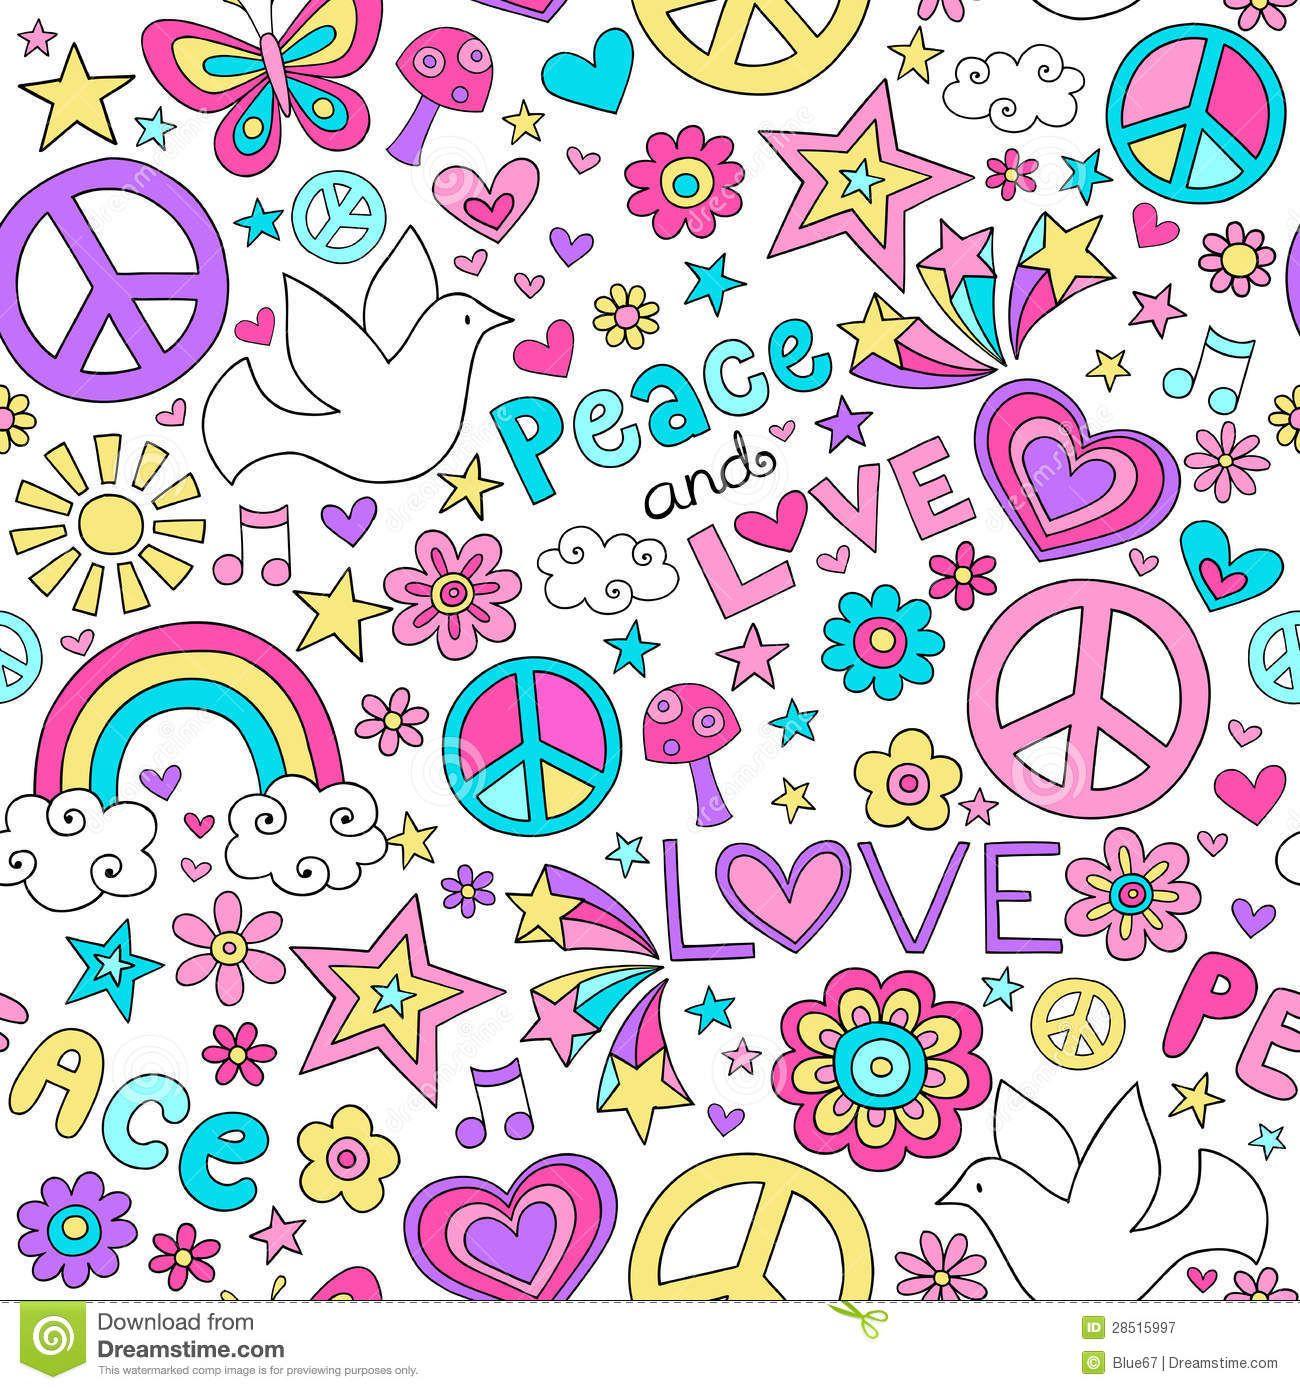 Wallpaper Peace And Love